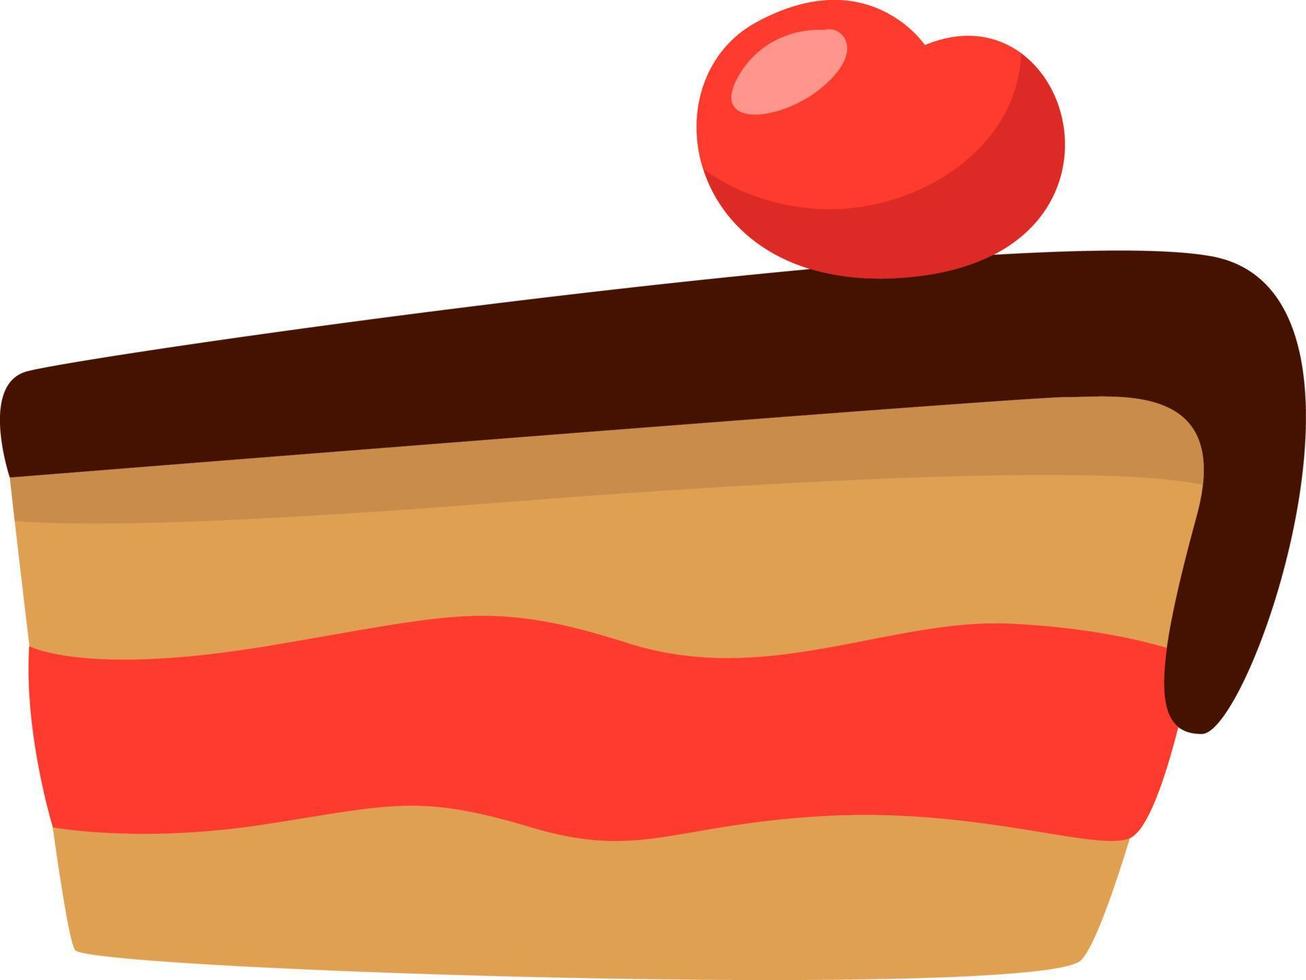 Slice of delicious cherry cake, illustration, vector on a white background.